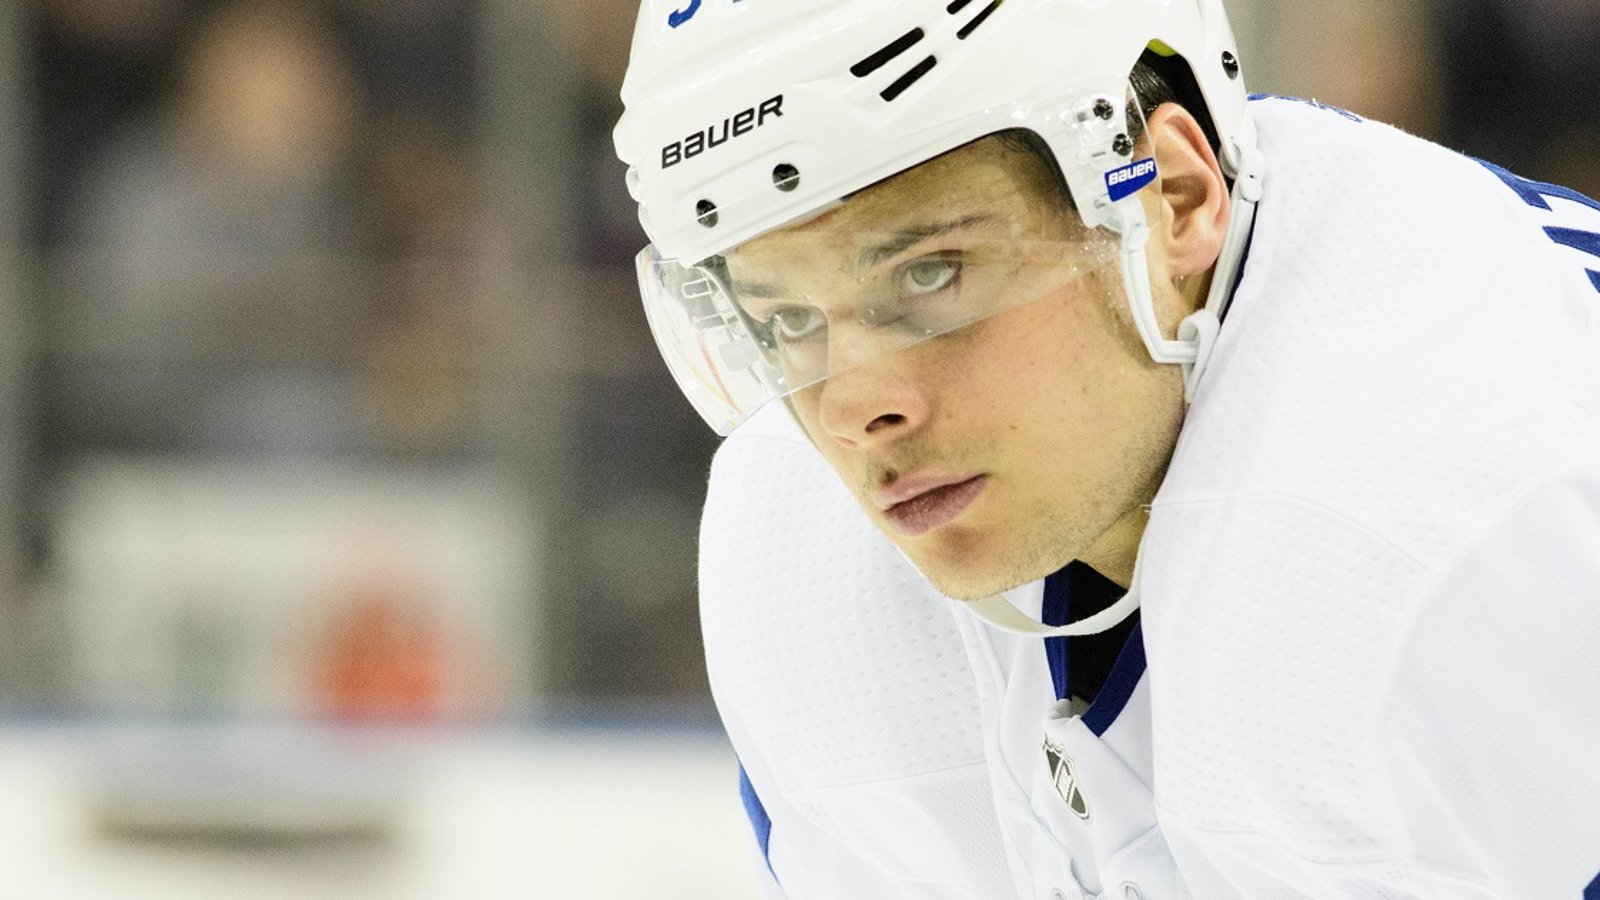 Rumor: Auston Matthews “would rather not play” with one of his teammates. 